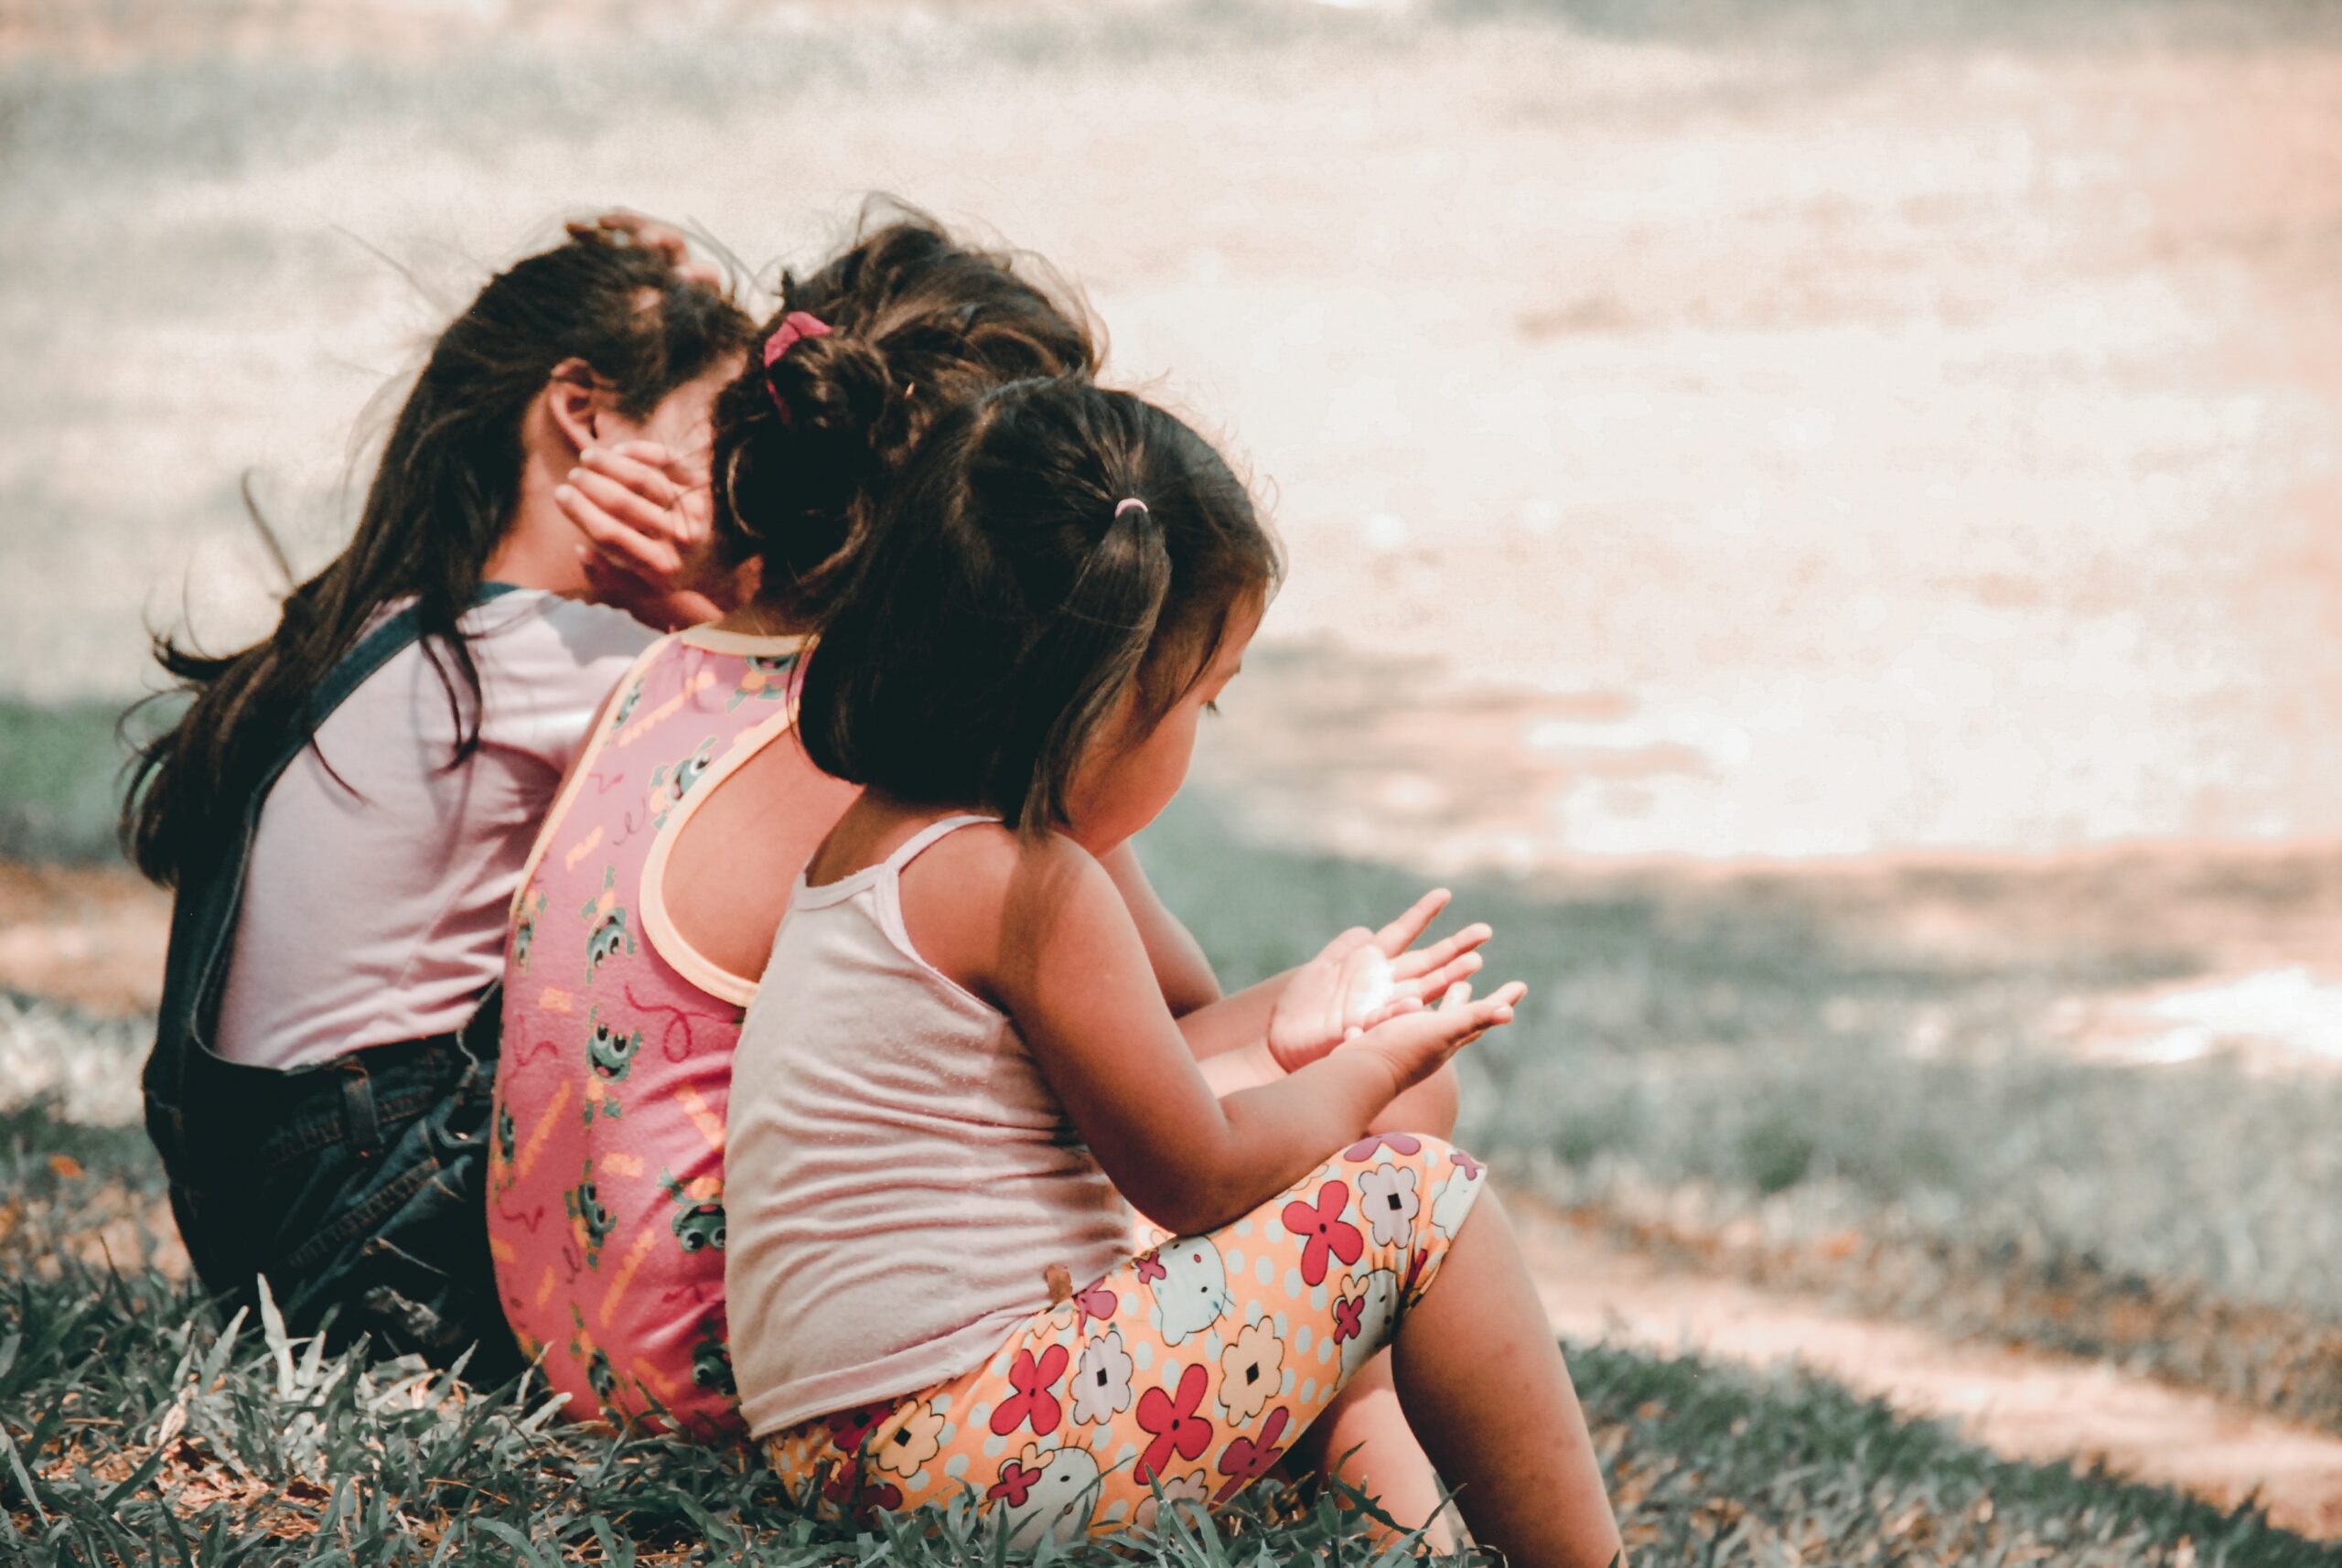 Highly sensitive kids prefer one or two close friends